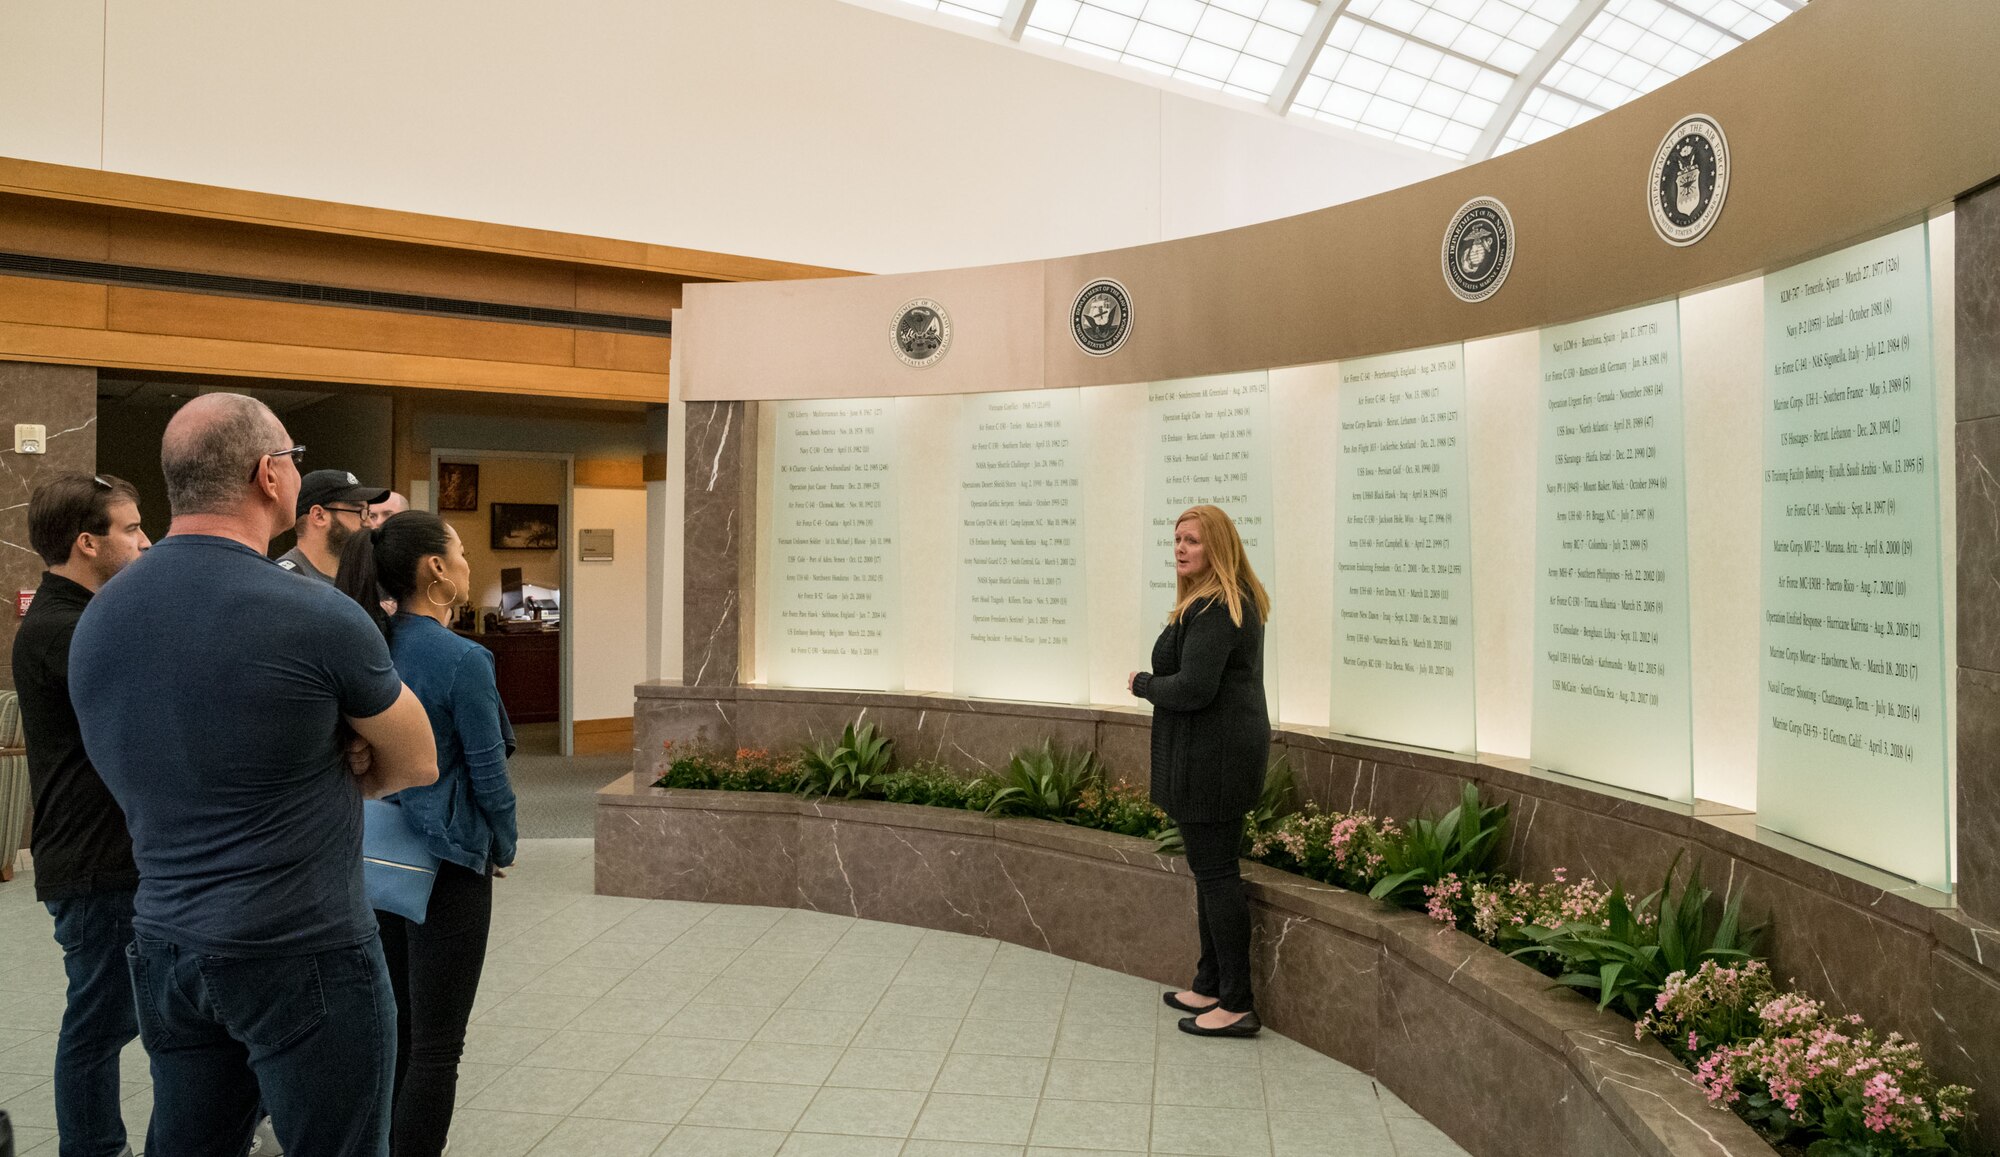 Christin Michaud, Air Force Mortuary Operations Affairs public affairs officer, briefs chef Robert Irvine and his wife, Gail Kim, about the AFMAO memorial wall, Aug. 27, 2019, at Dover Air Force Base, Del. The Memorial Wall represents many of the fallen service members and civilians throughout the years of the mortuary’s history. (U.S. Air Force photo by Roland Balik)